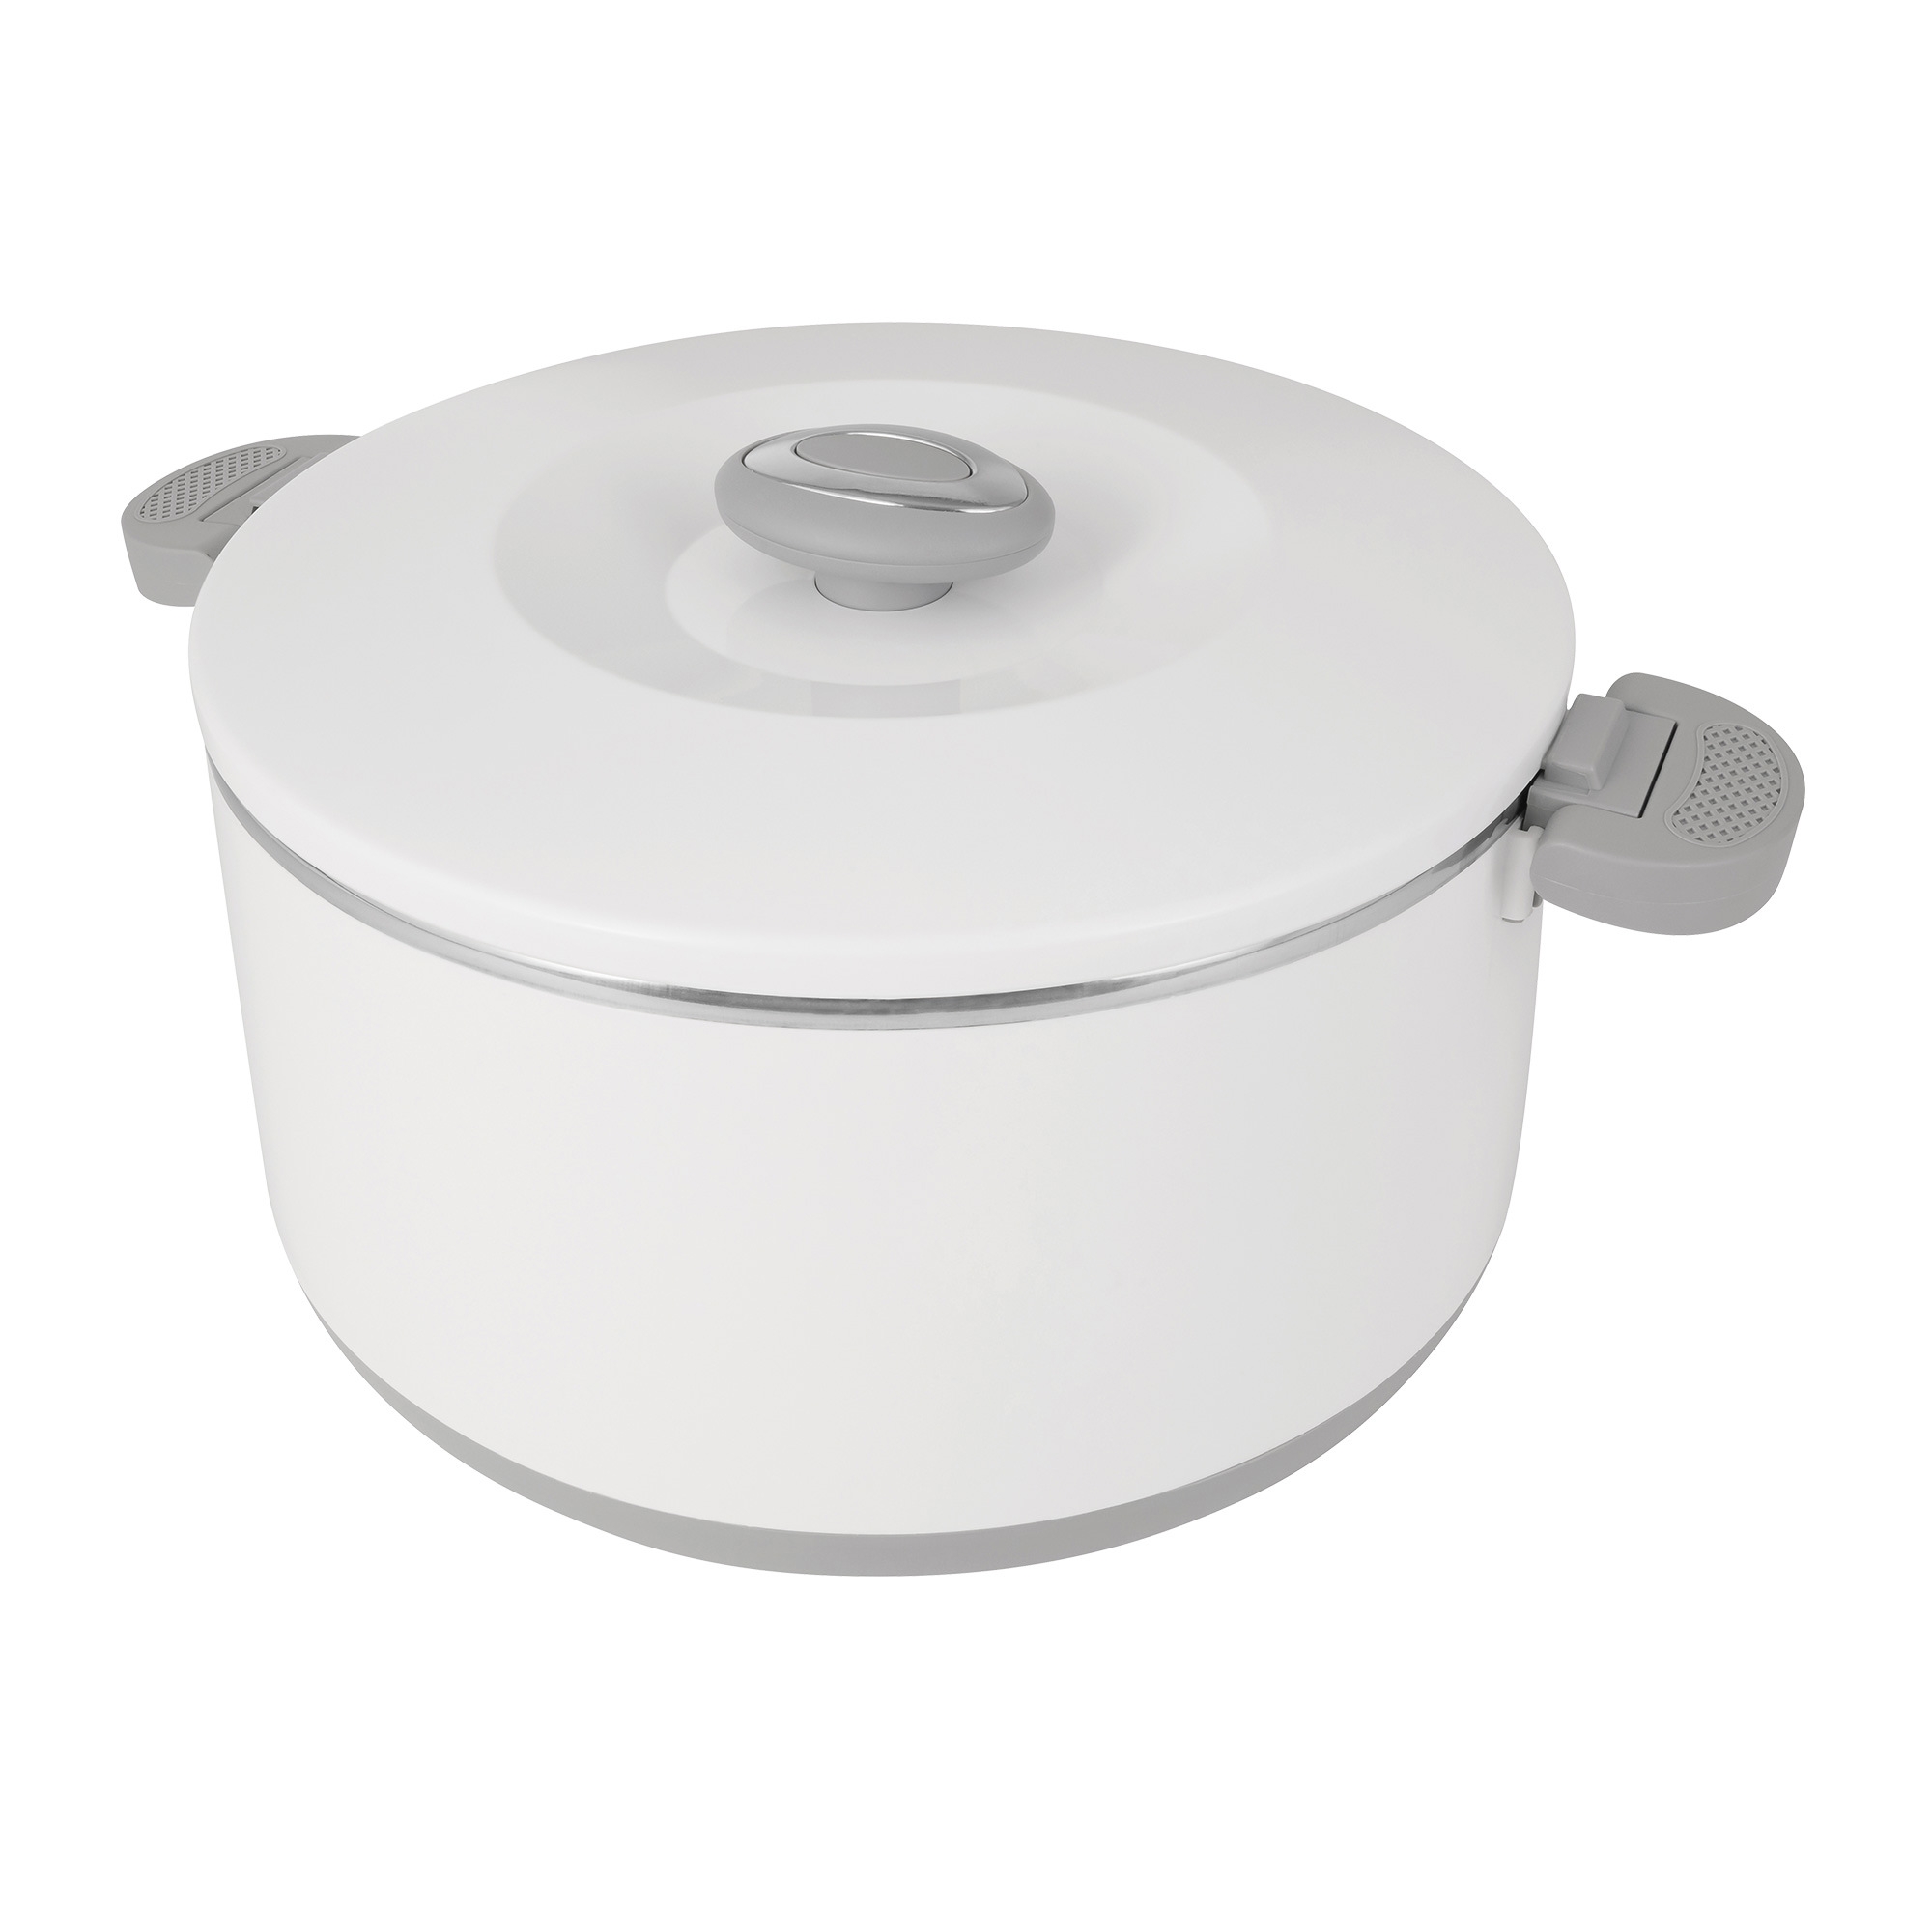 Pyrolux Pyrotherm Food Warmer 10L Image 1